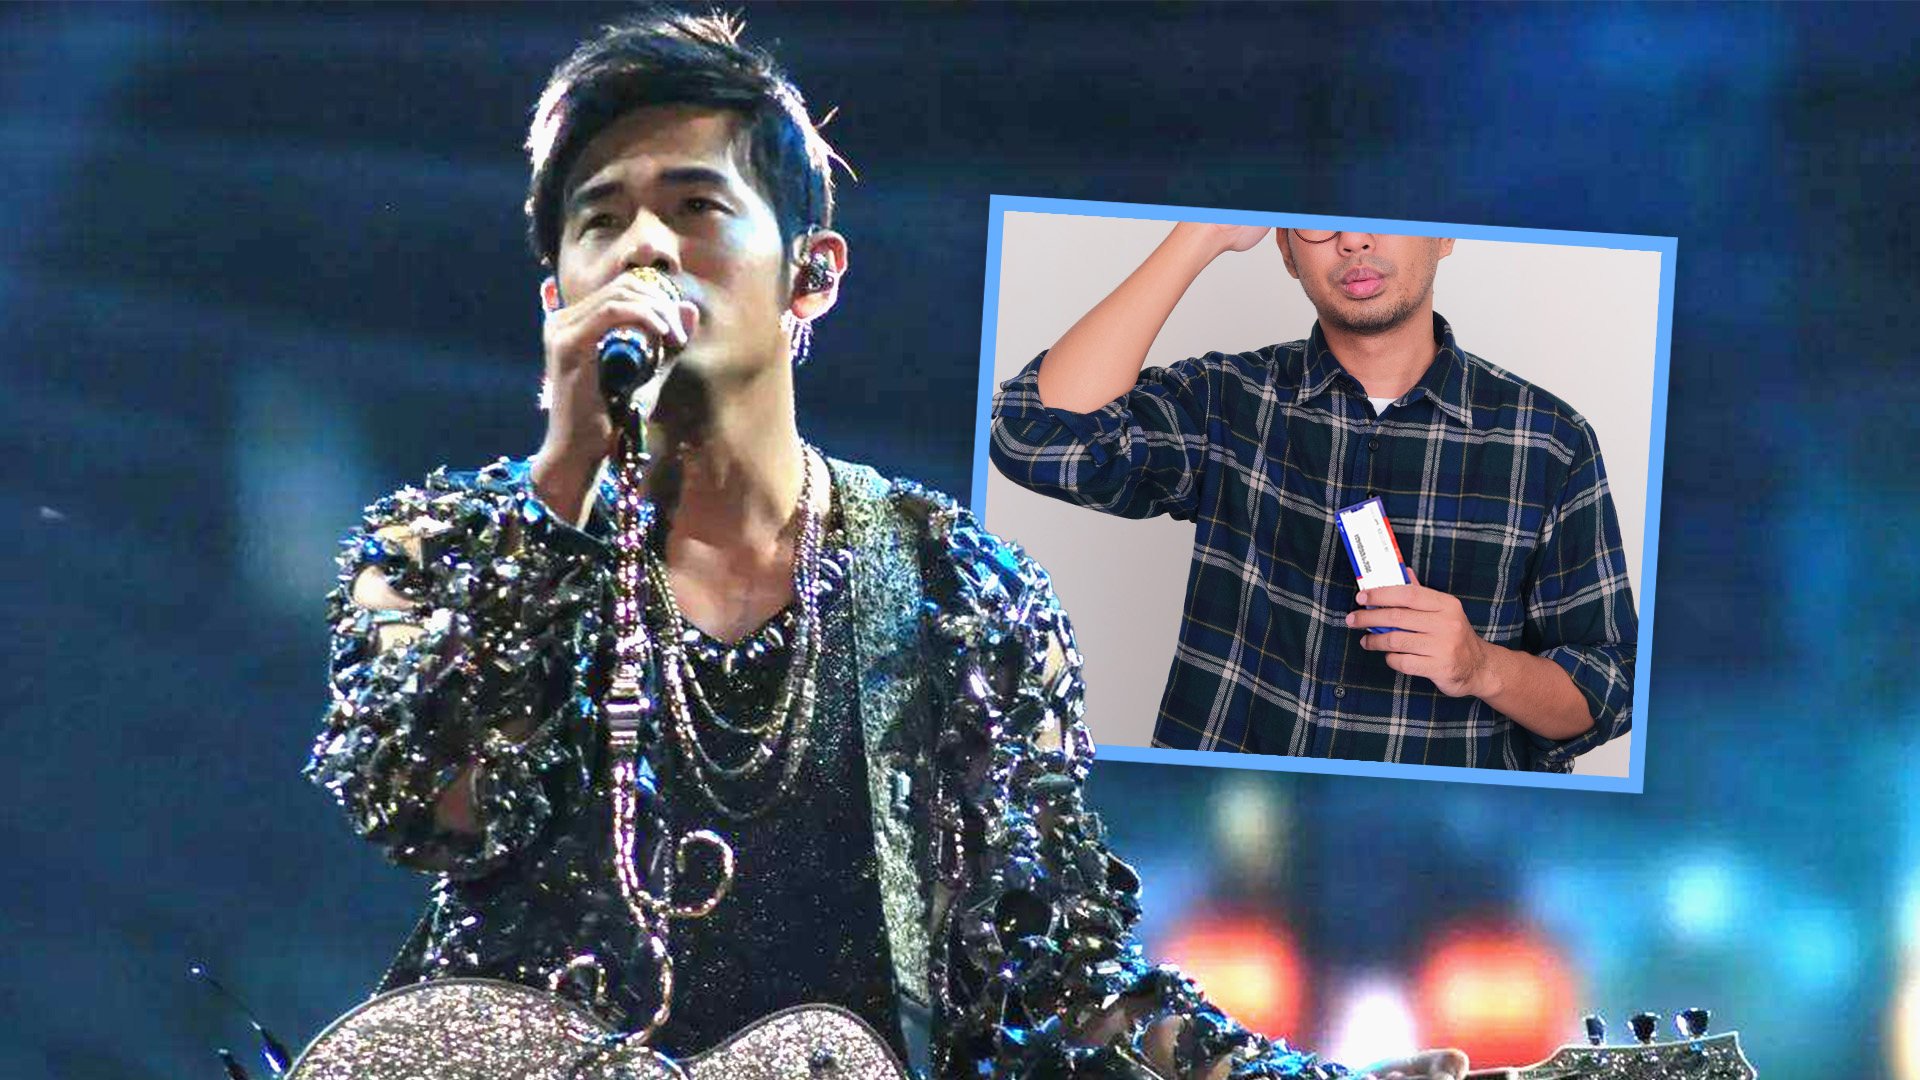 A grieving brother in China was left upset after a leading sales platform refused to either refund or change the name on a Jay Chou concert ticket that his sister had bought before being killed in an accident. Photo: SCMP composite/Shutterstock/Sohu
